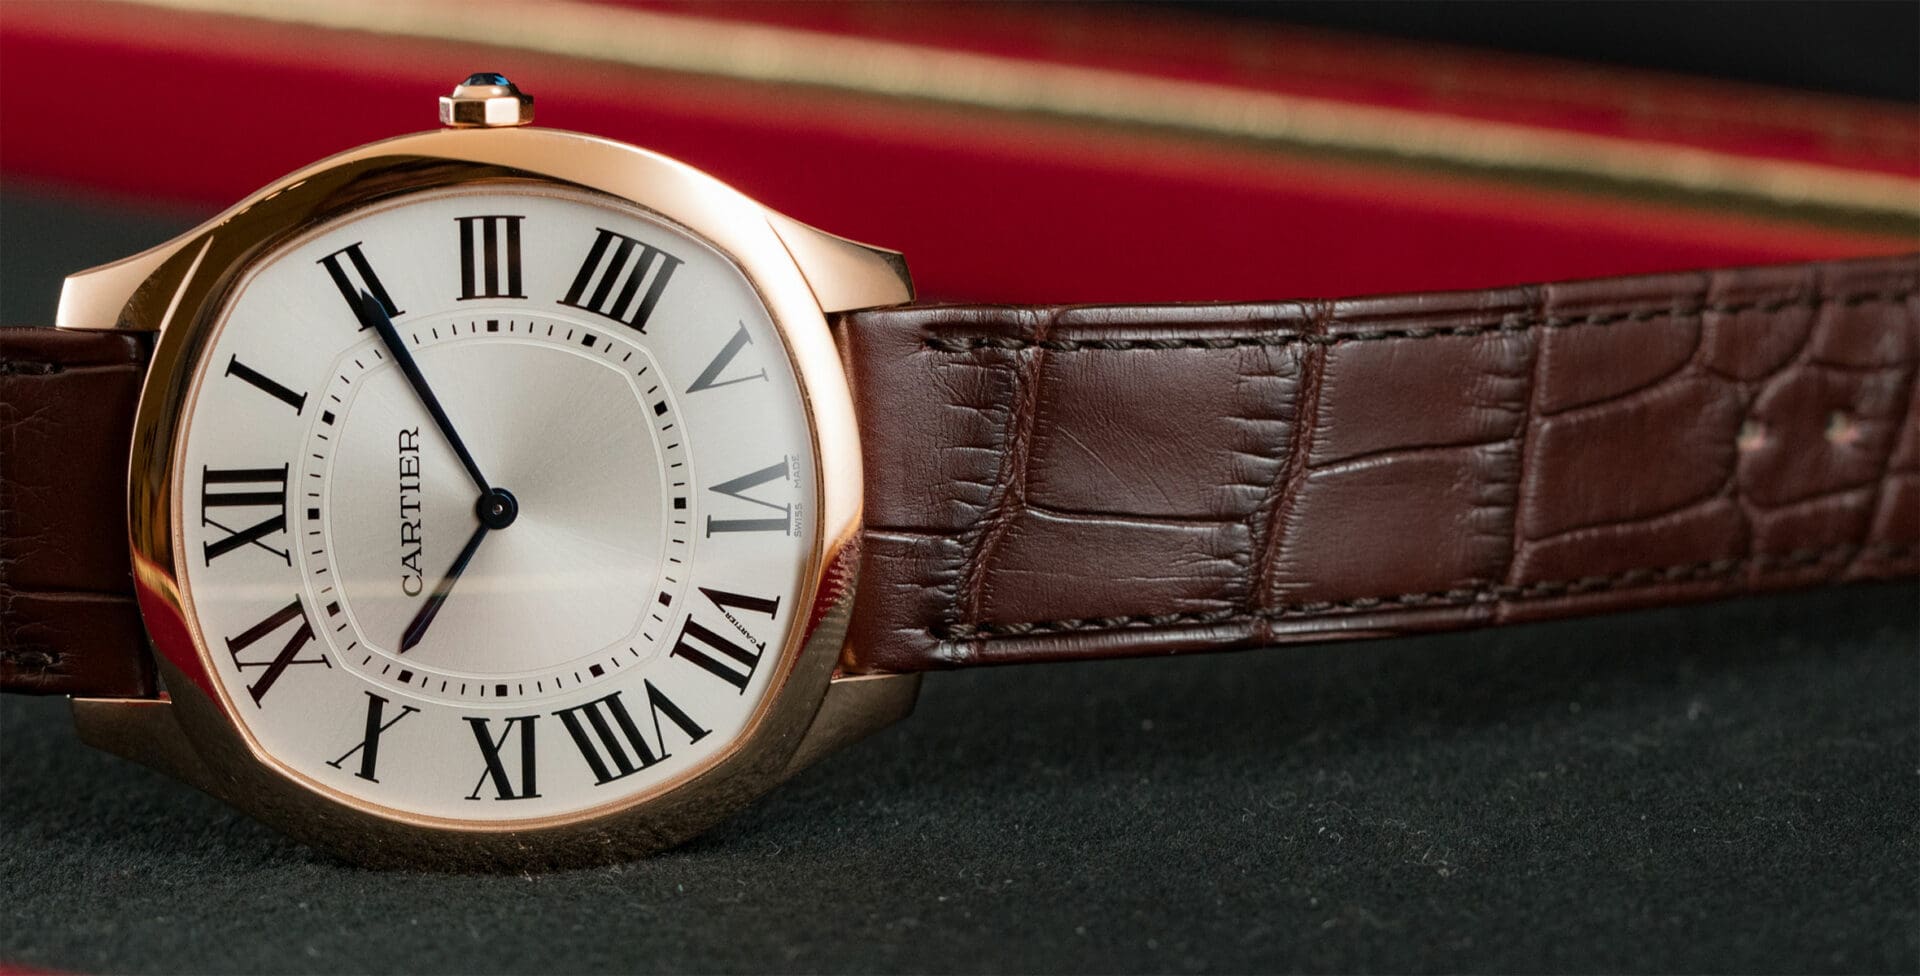 VIDEO: Cartier 2017 collection overview and the ‘perfect’ Drive